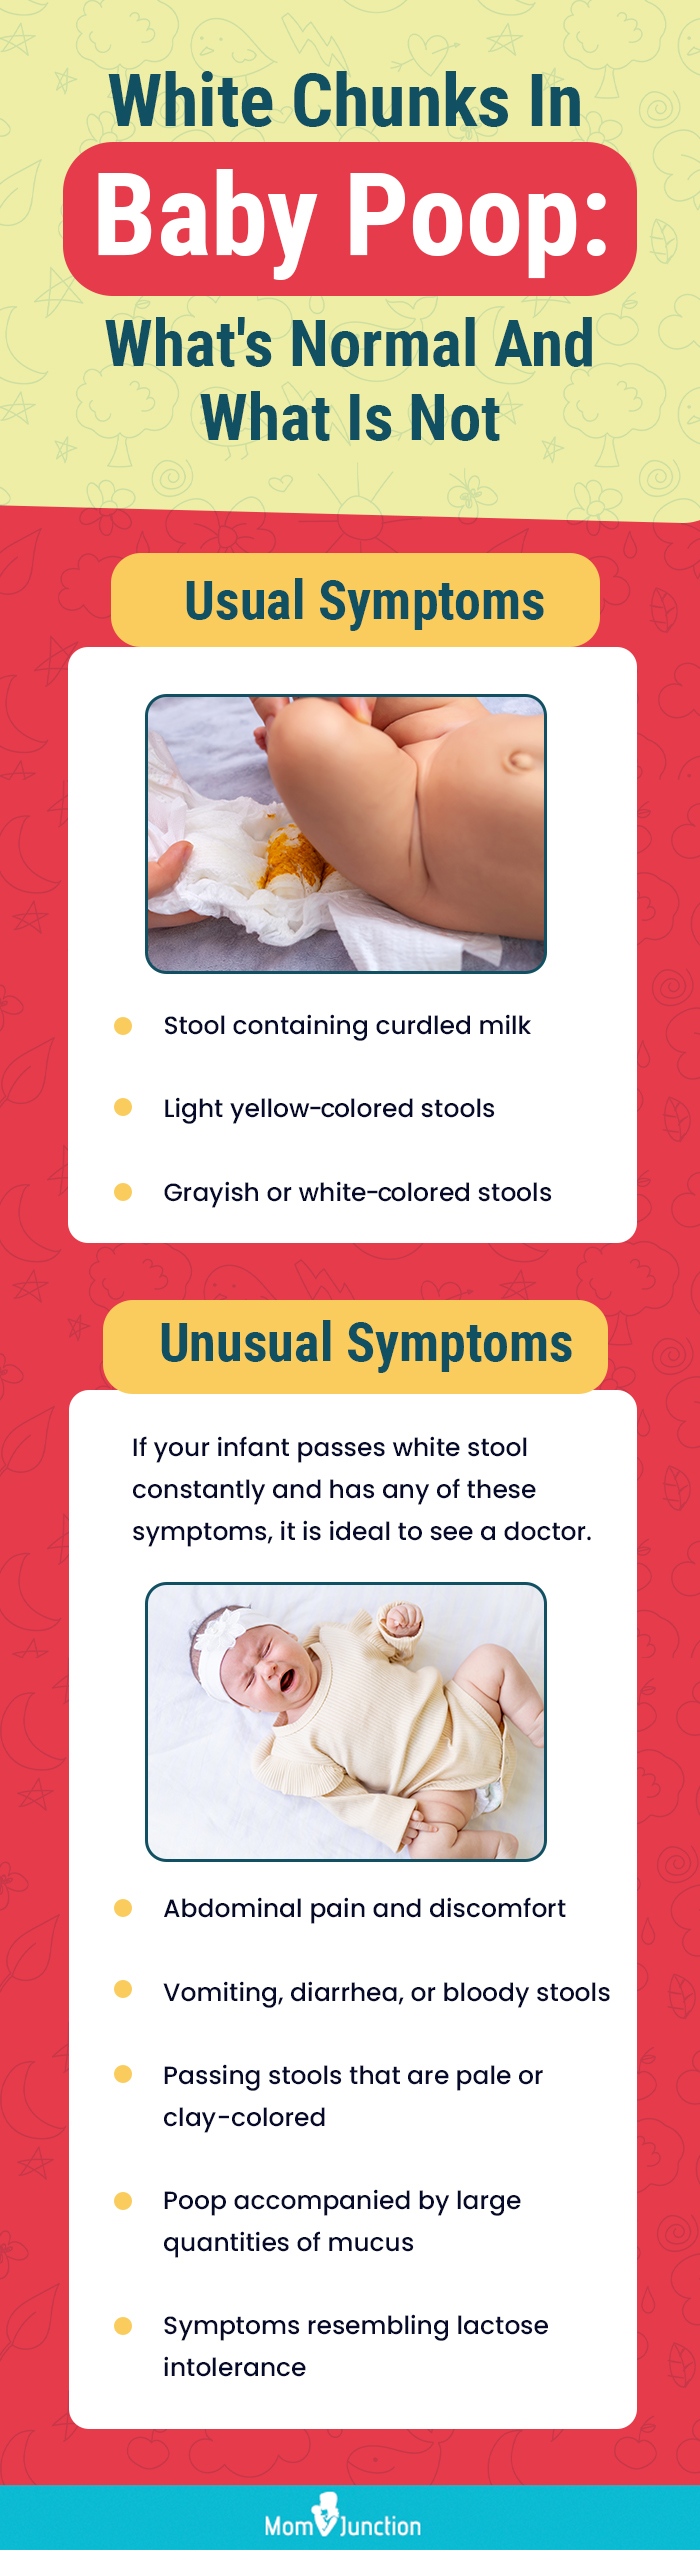 white chunks in baby poop whats normal and what is not (infographic)